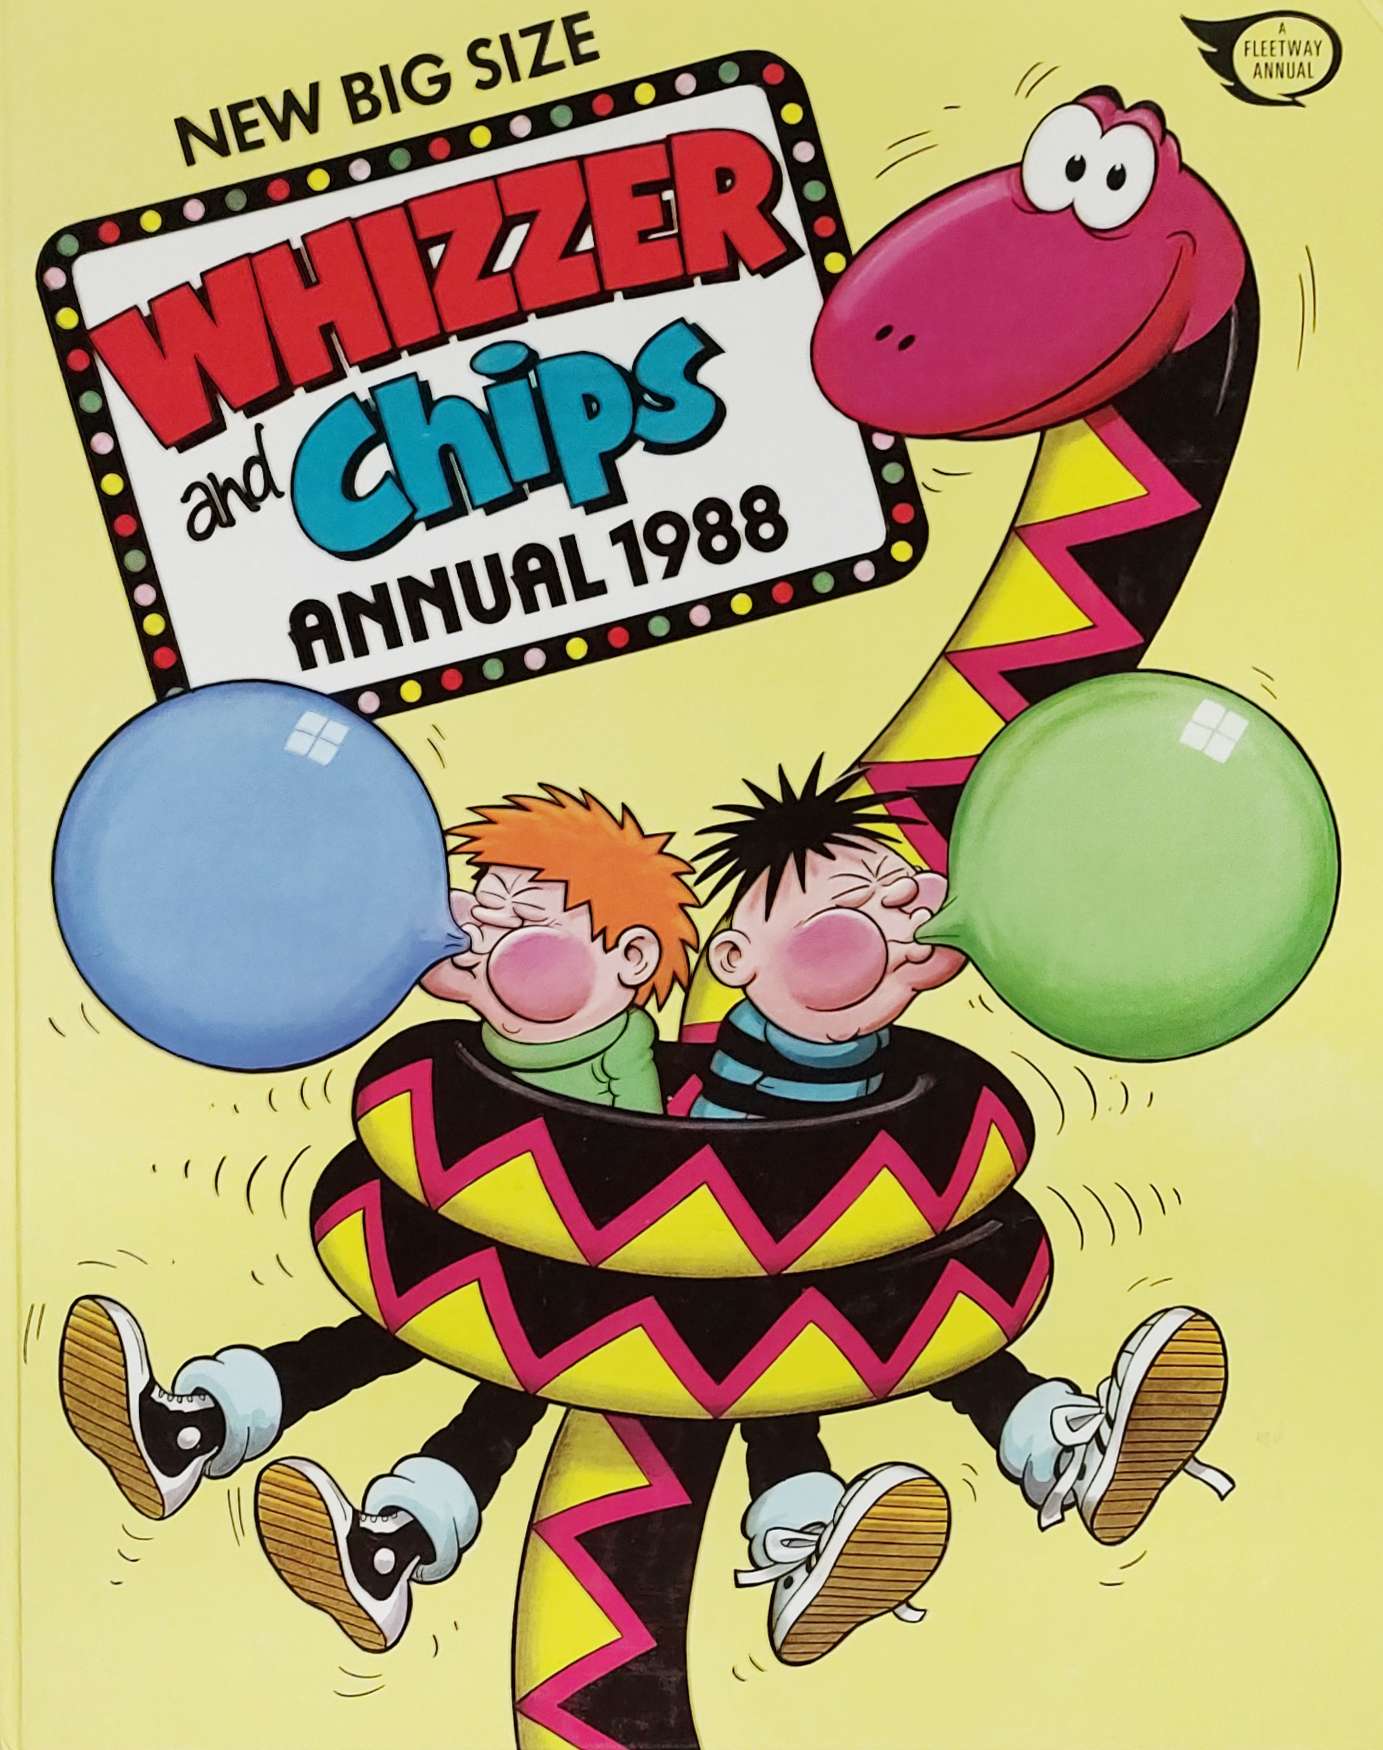 Whizzer & Chips Annual 1988 (Hardcover, Fleetway)